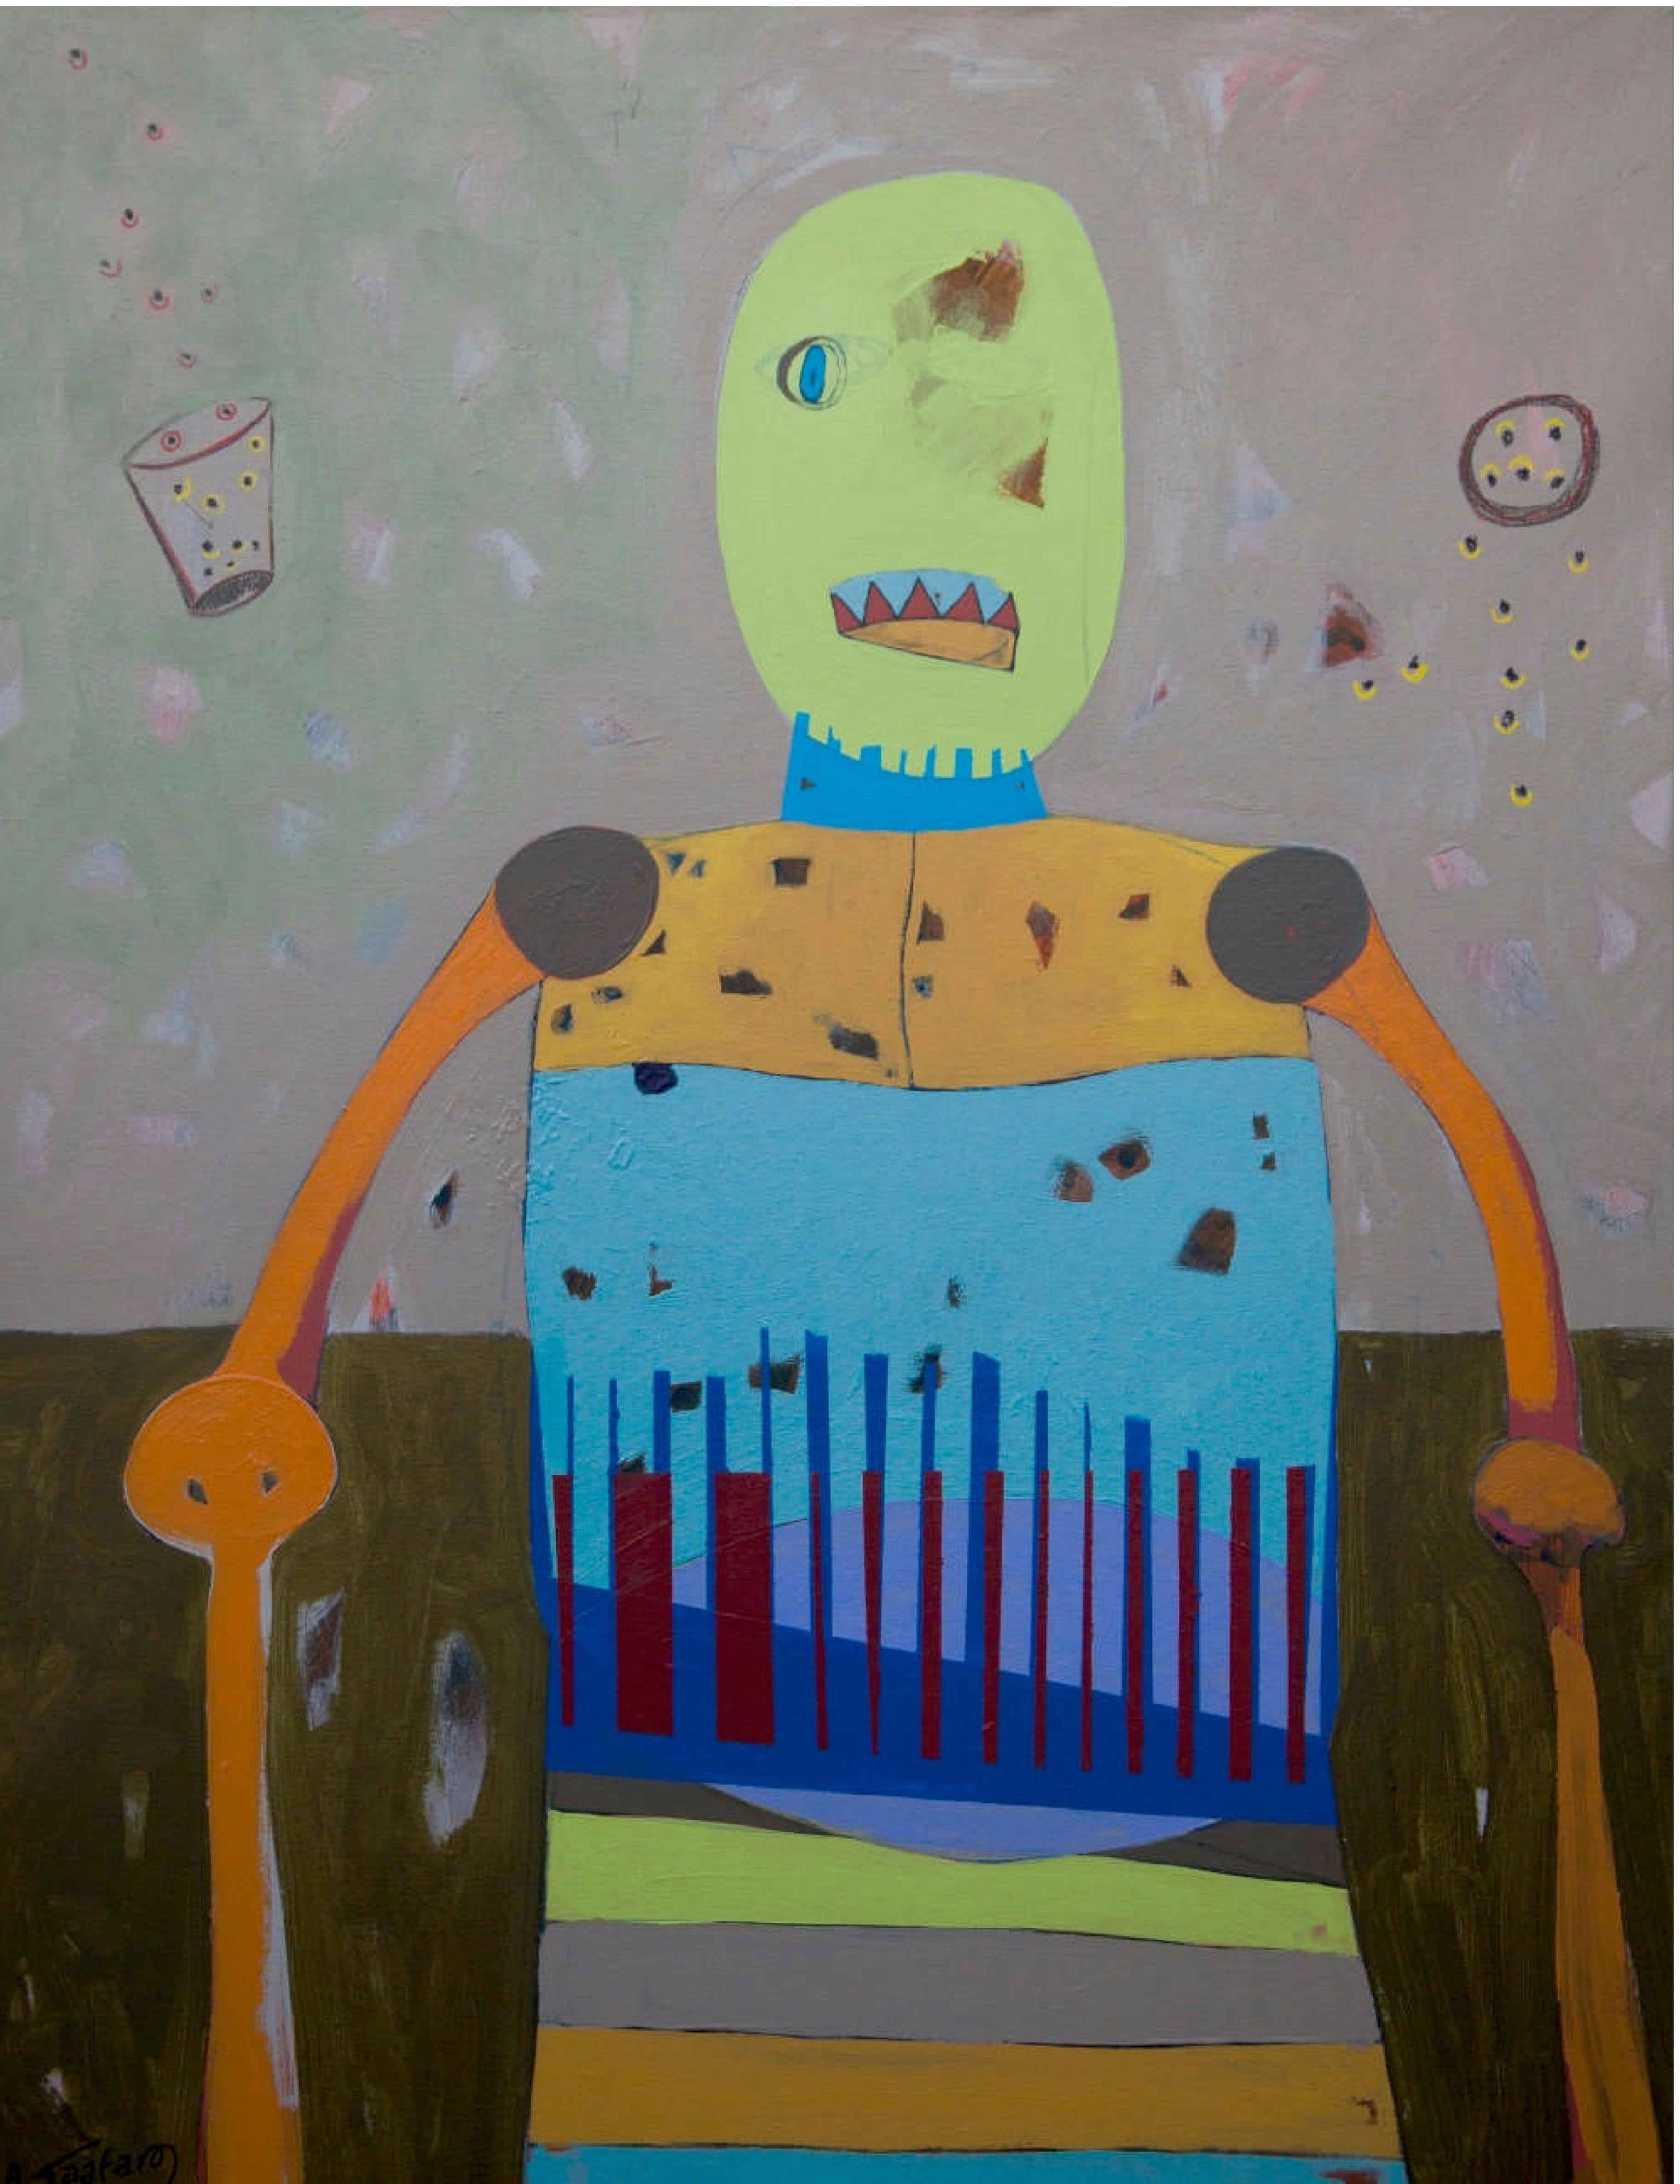 "Bionic Figure II" Acrylic & Oil pastel Painting 47" x 37" inch by Ahmed Gaafary

Born In Cairo 1987 Where He Currently Lives And Works. He Received His Bachelor’s Degree In Information Systems In 2008 From The Higher Institute Of Advanced Studies